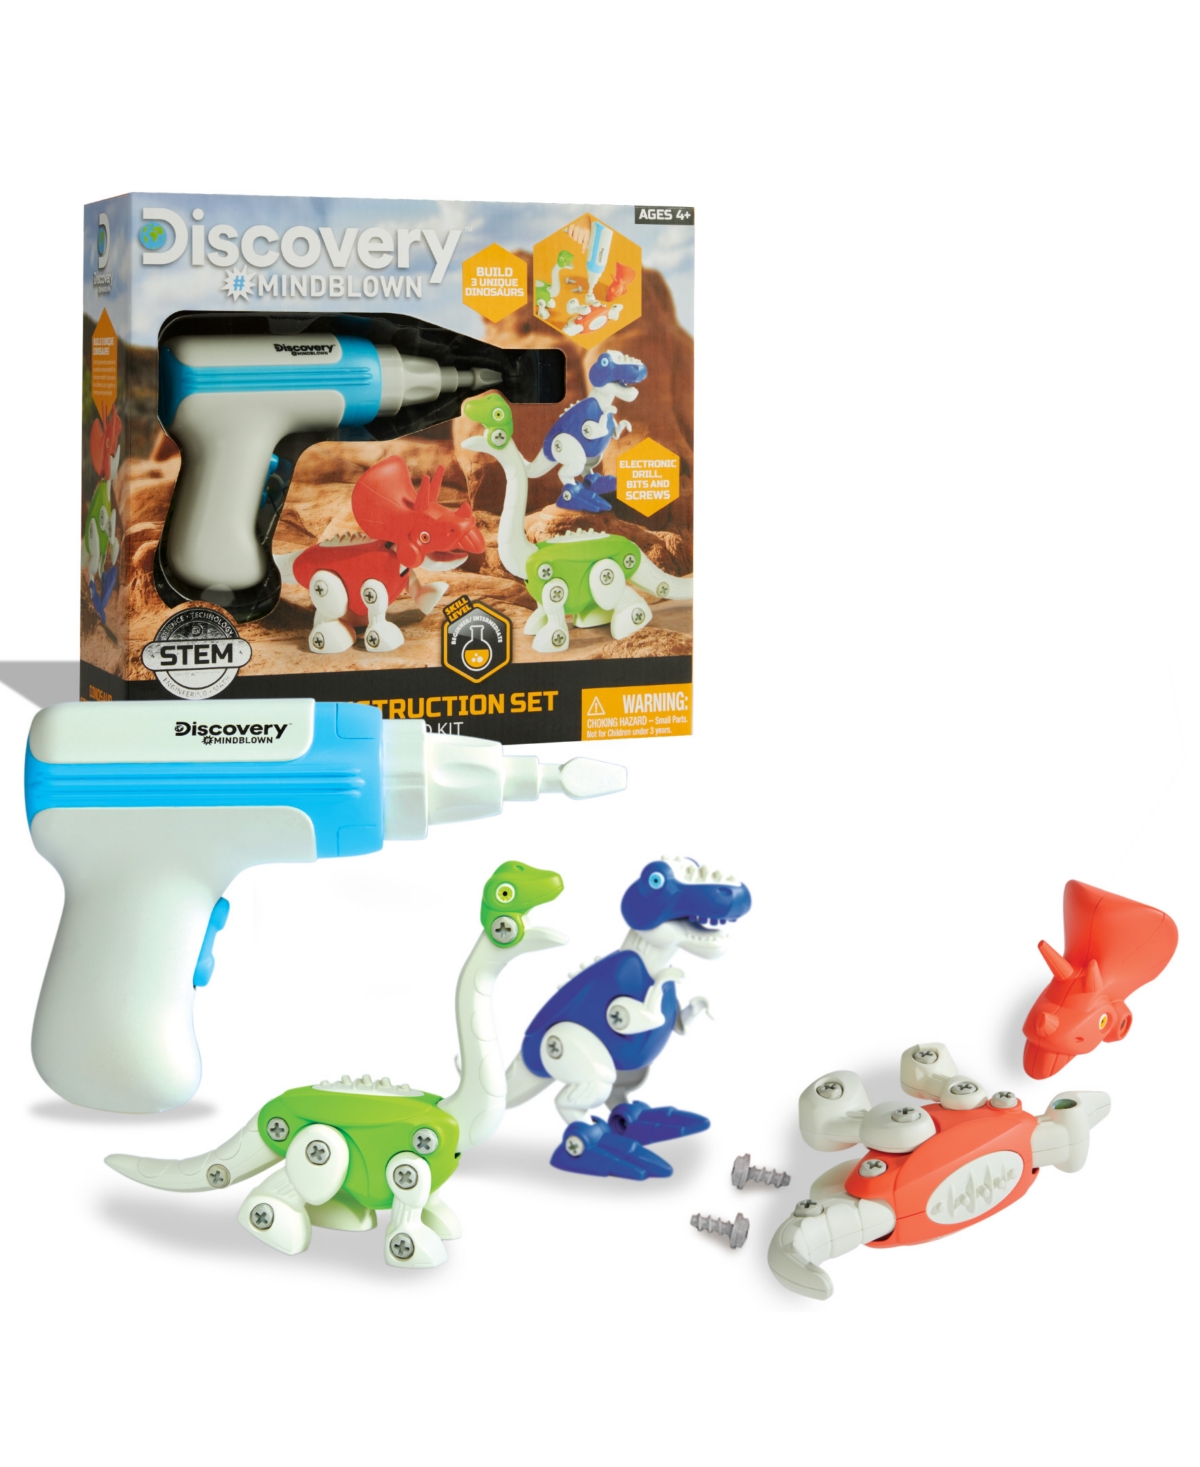 Discovery Mindblown Kids' Dinosaur Construction Action Model Build Set In Open Miscellaneous